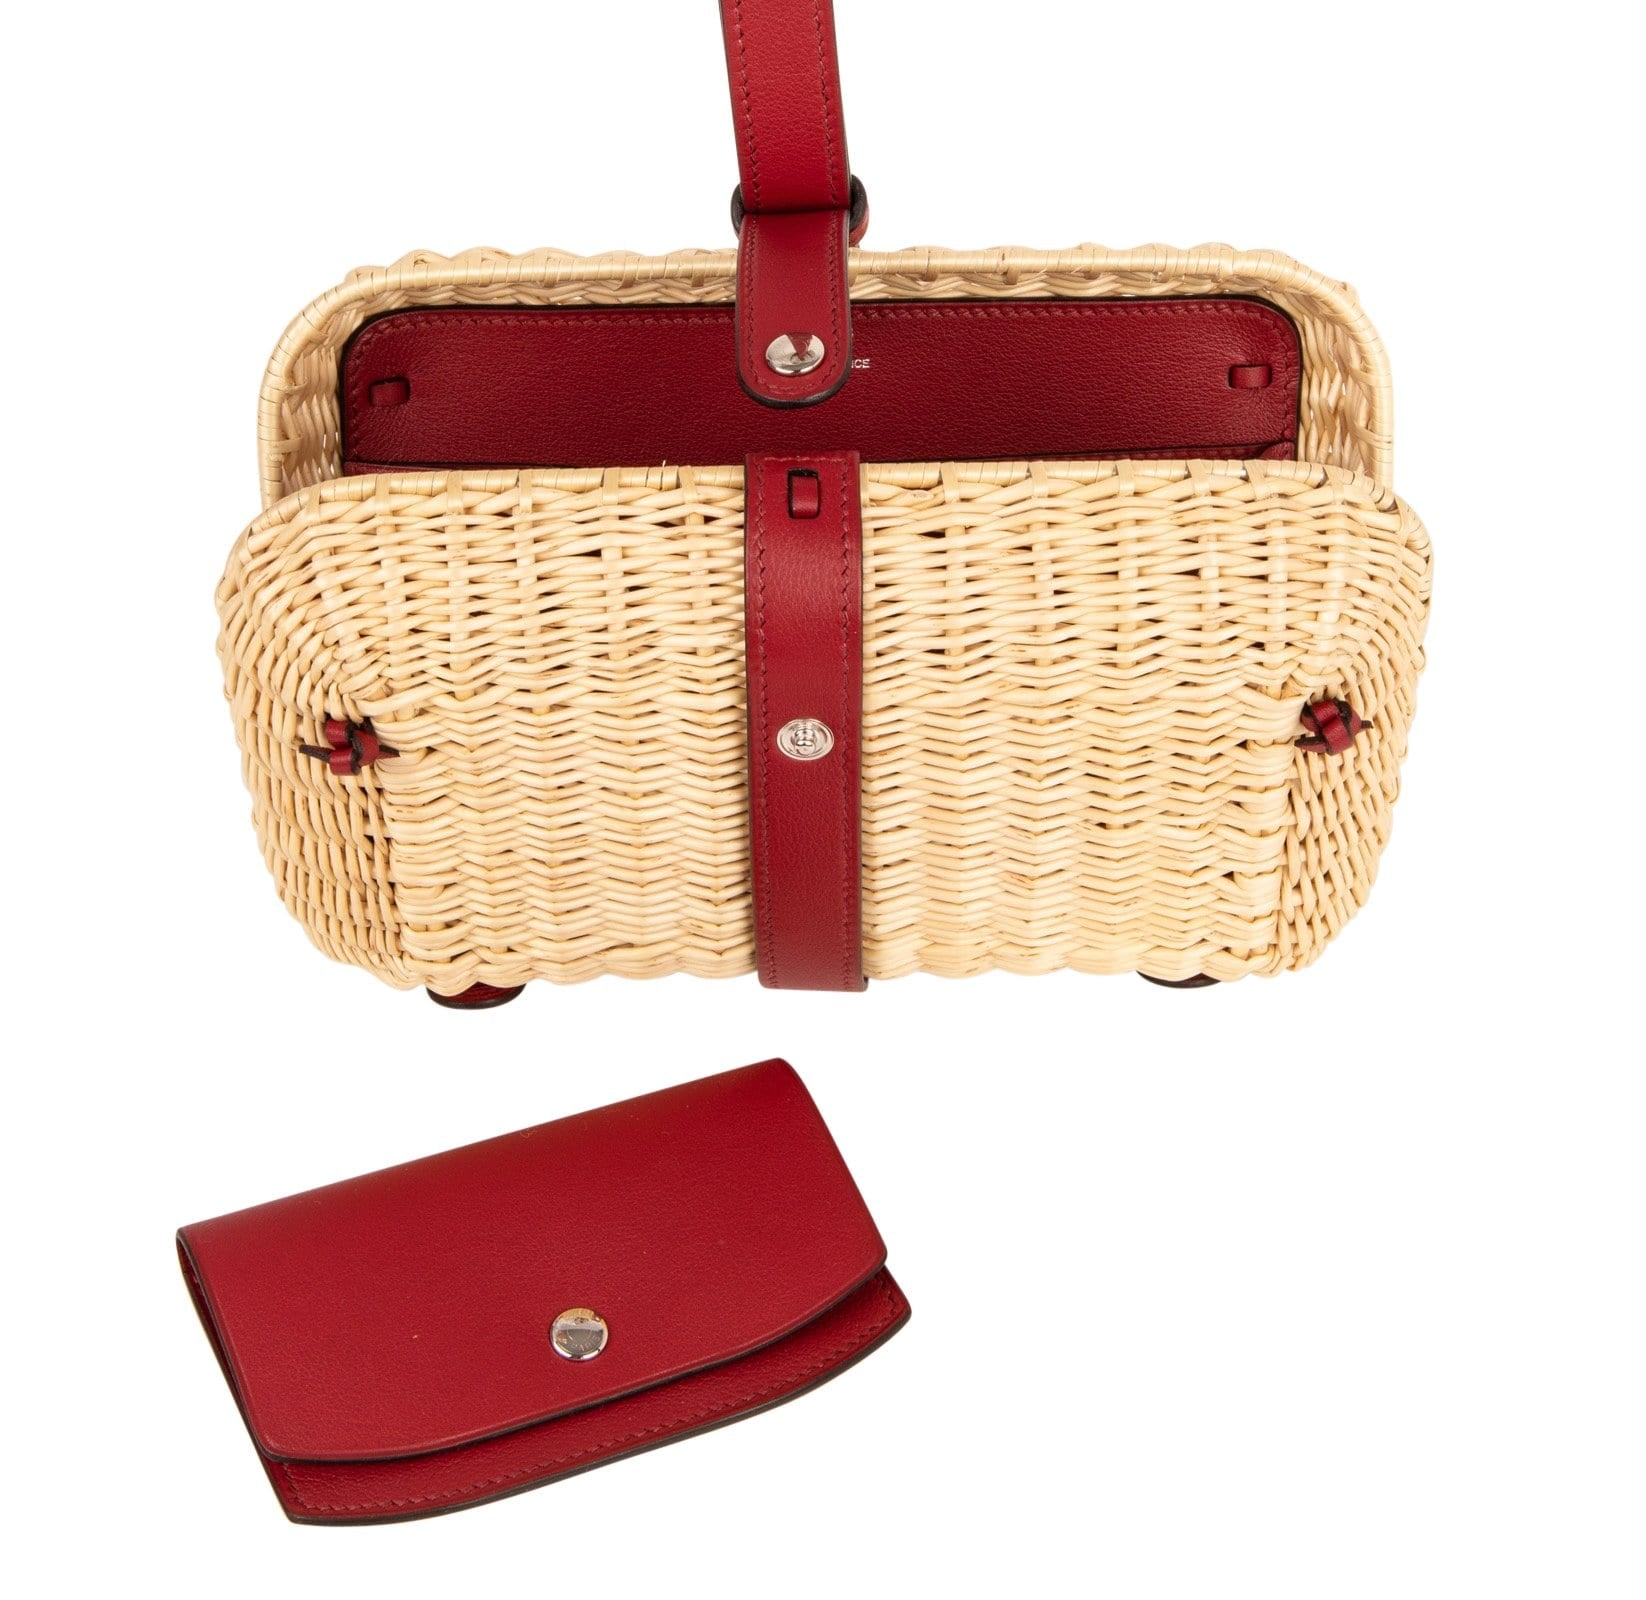 Hermes Bag Picnic Osier Wicker Clutch Rouge H New - mightychic